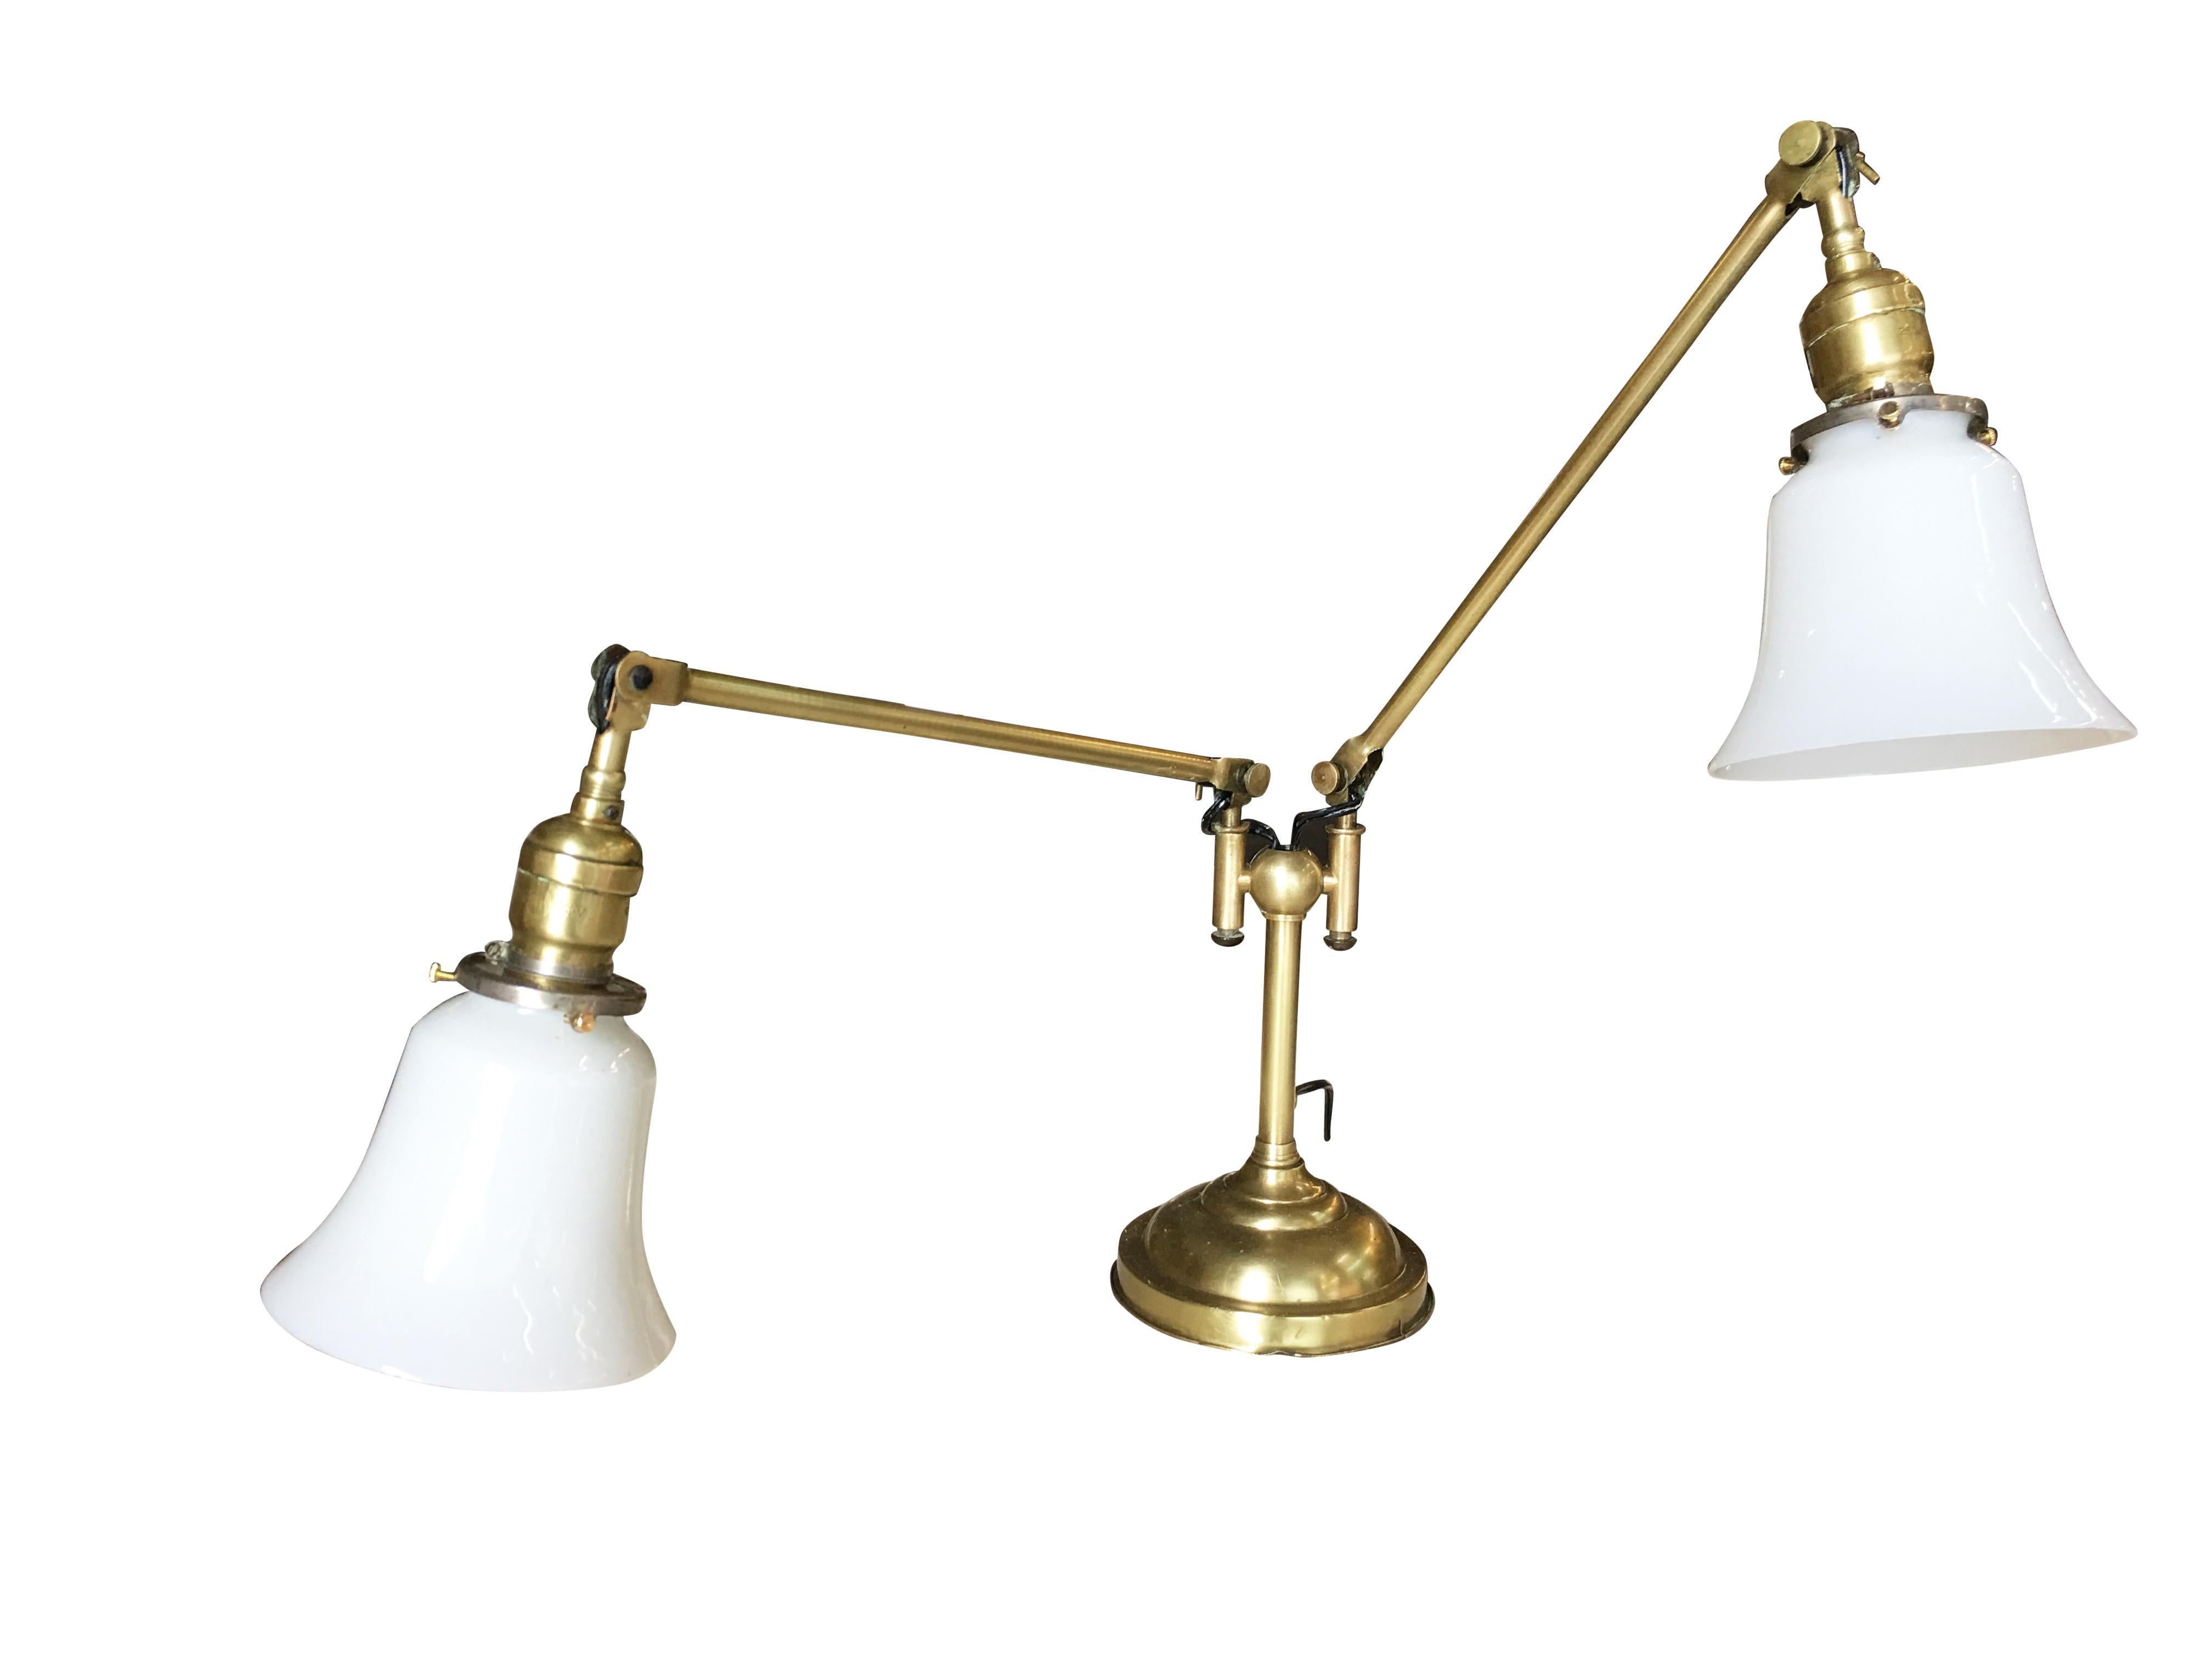 Early late Edwardian industrial articulating brass lamp with dual lights. Each with milk glass bell-shaped shades. The lamp is in excellent condition and works perfectly.

Dimensions:
21